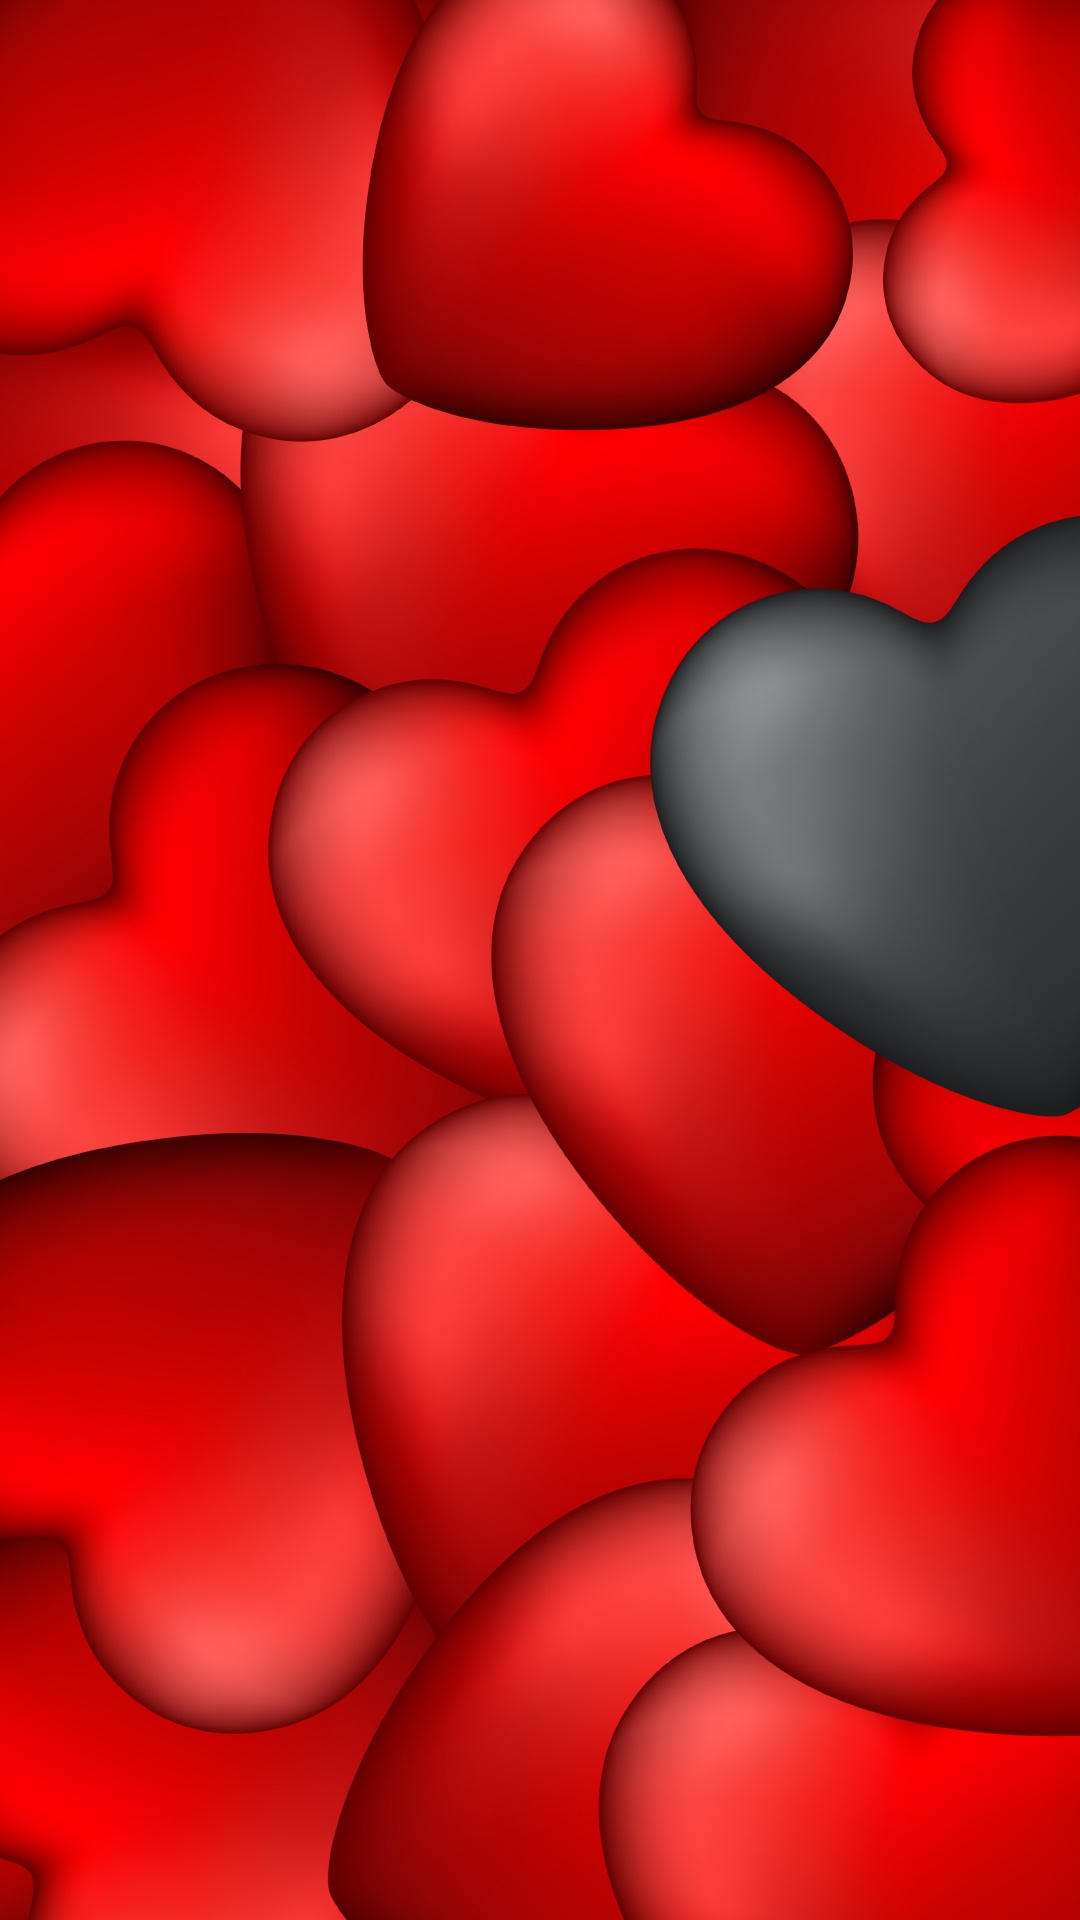 Heart, Black, Red, Valentines Day, Petal. Wallpaper in 1080x1920 Resolution